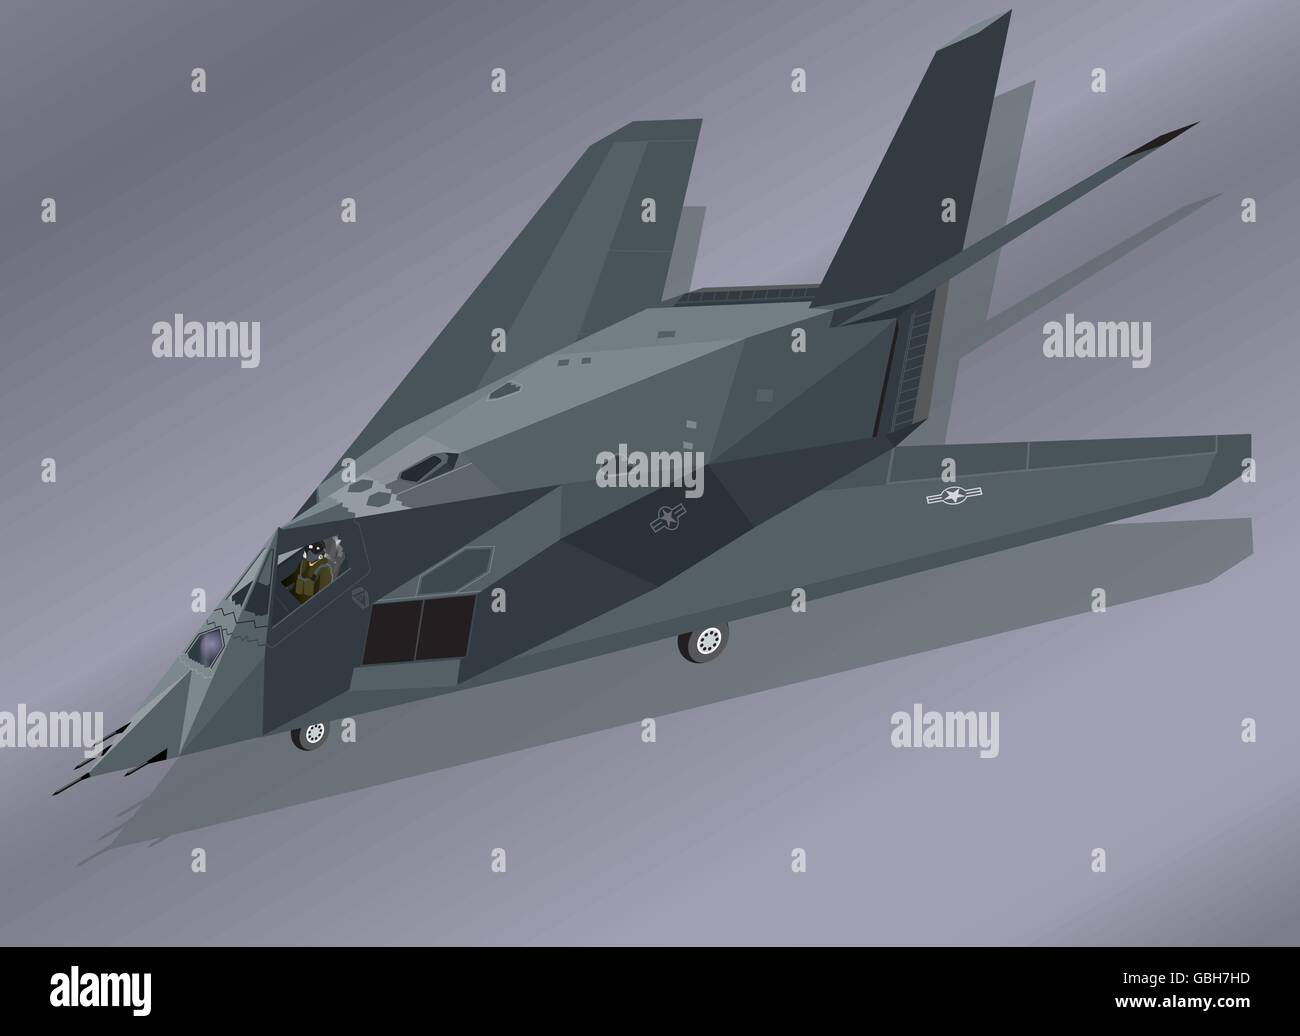 Detailed Isometric Illustration of an F-117 Nighthawk Stealth Fighter on the Ground Stock Vector